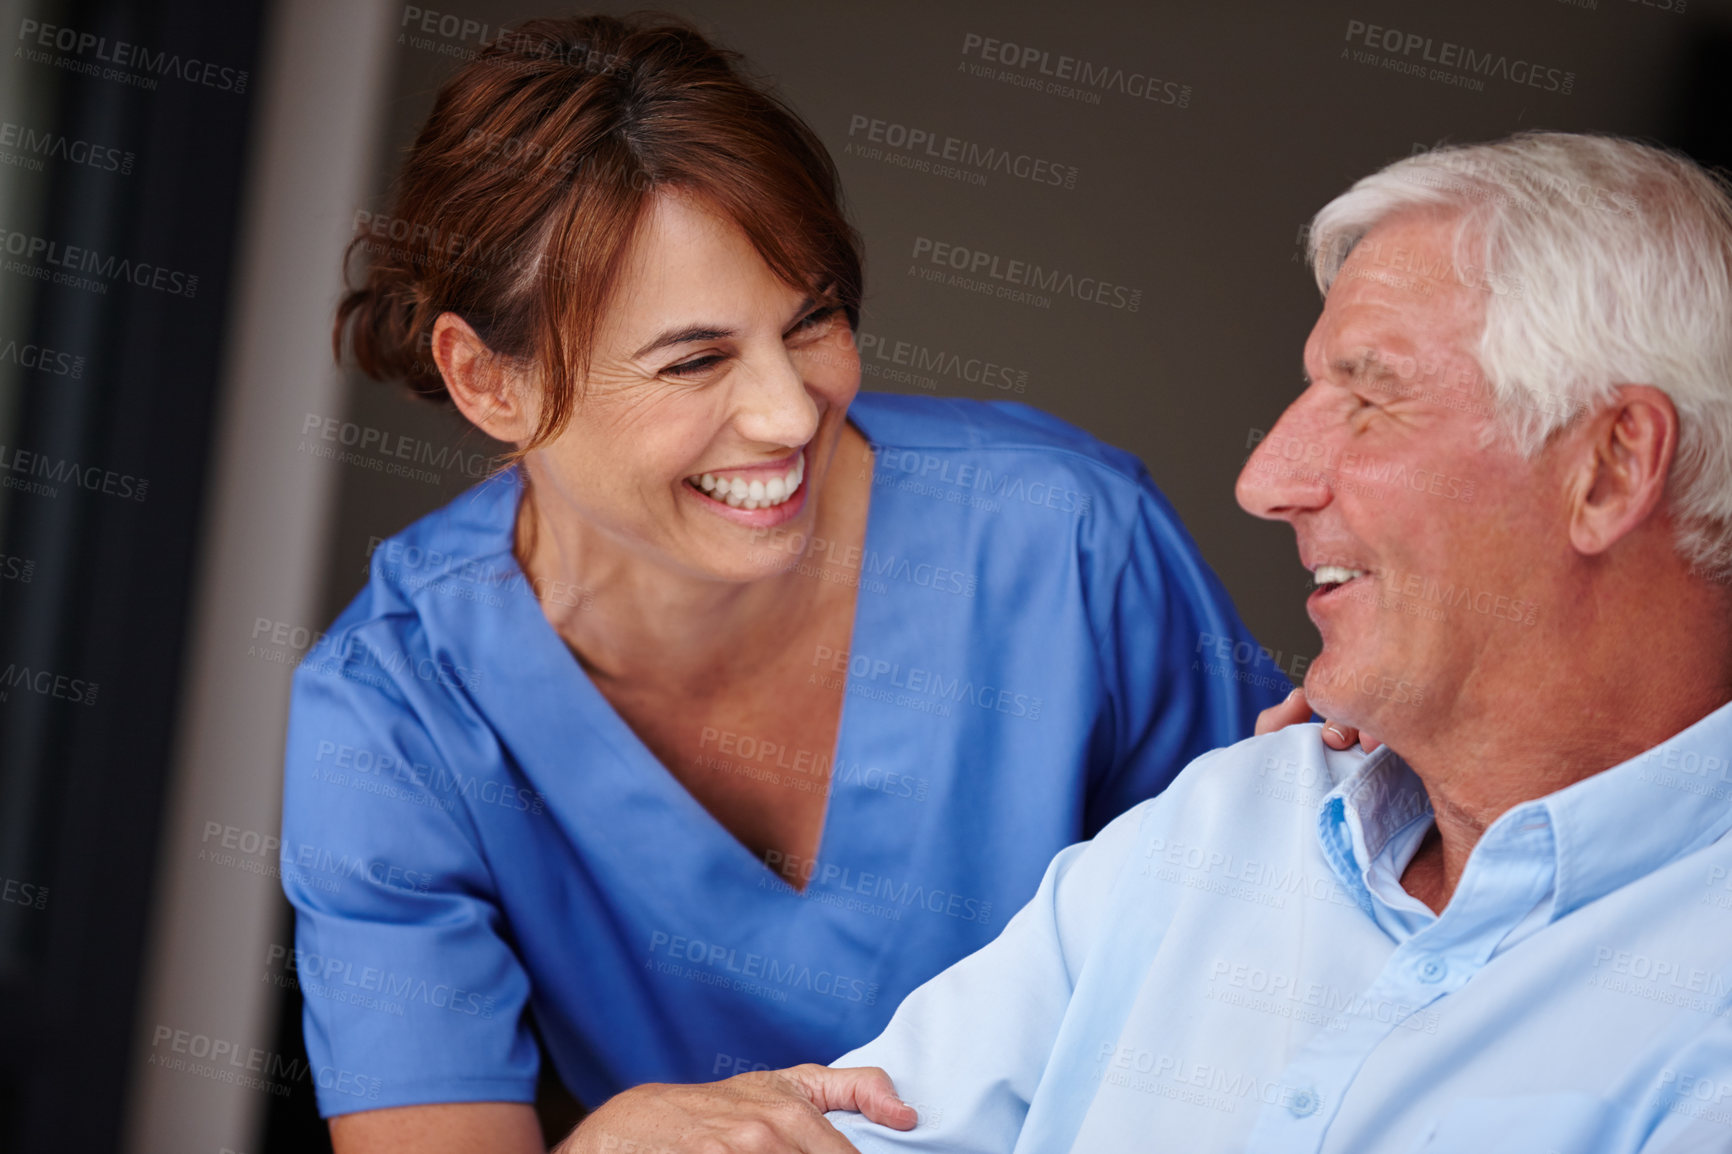 Buy stock photo Cropped shot of a female nurse checking on her senior patient